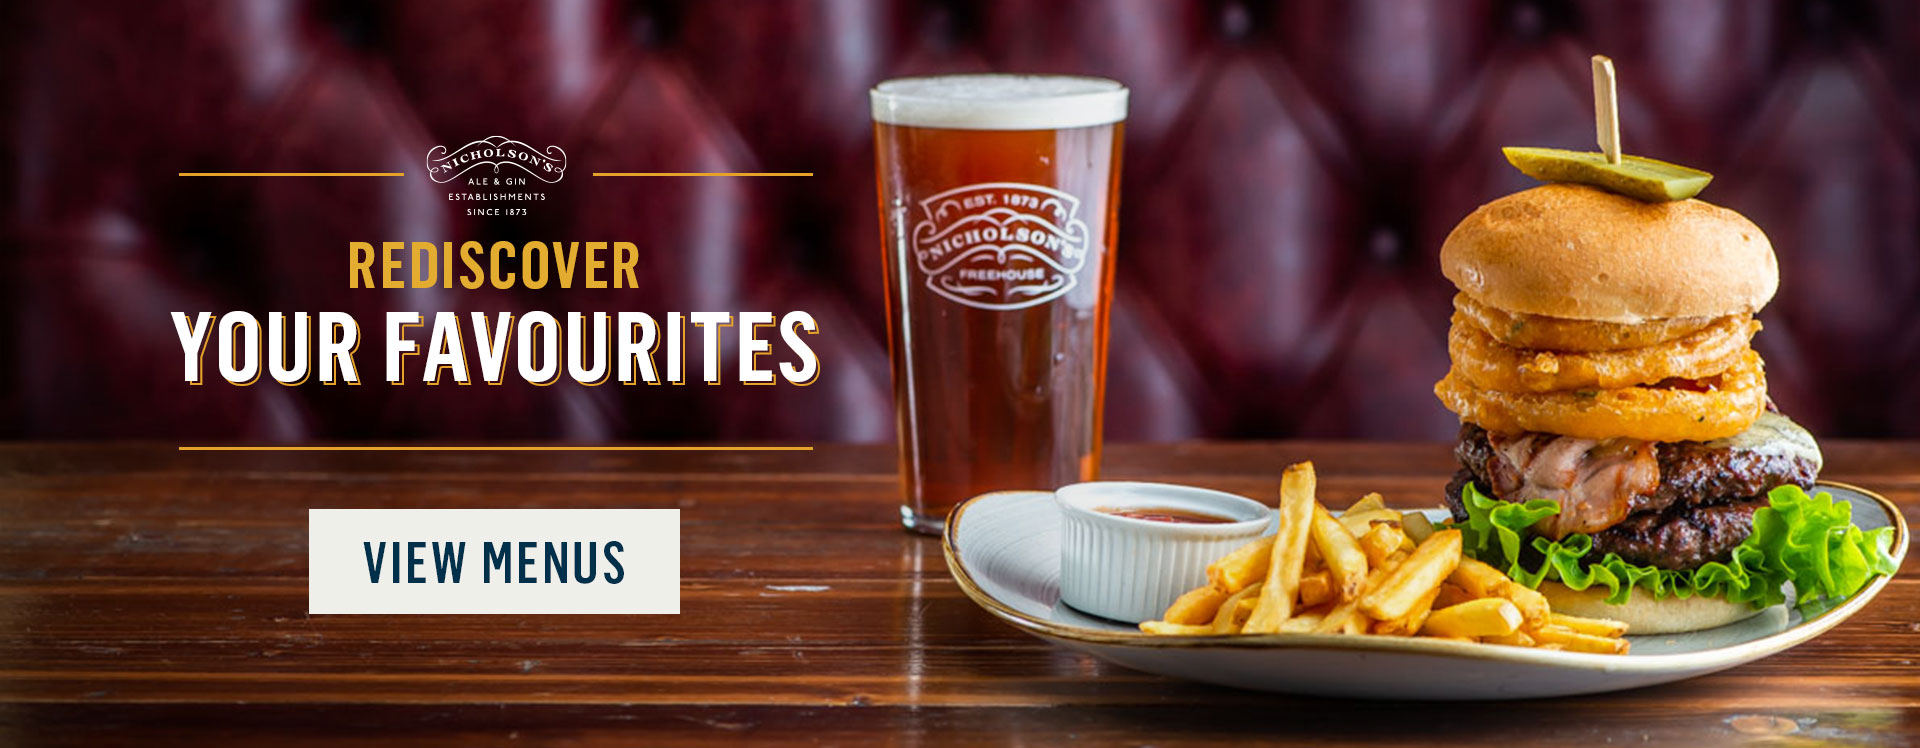 Rediscover your favourites at The White Horse